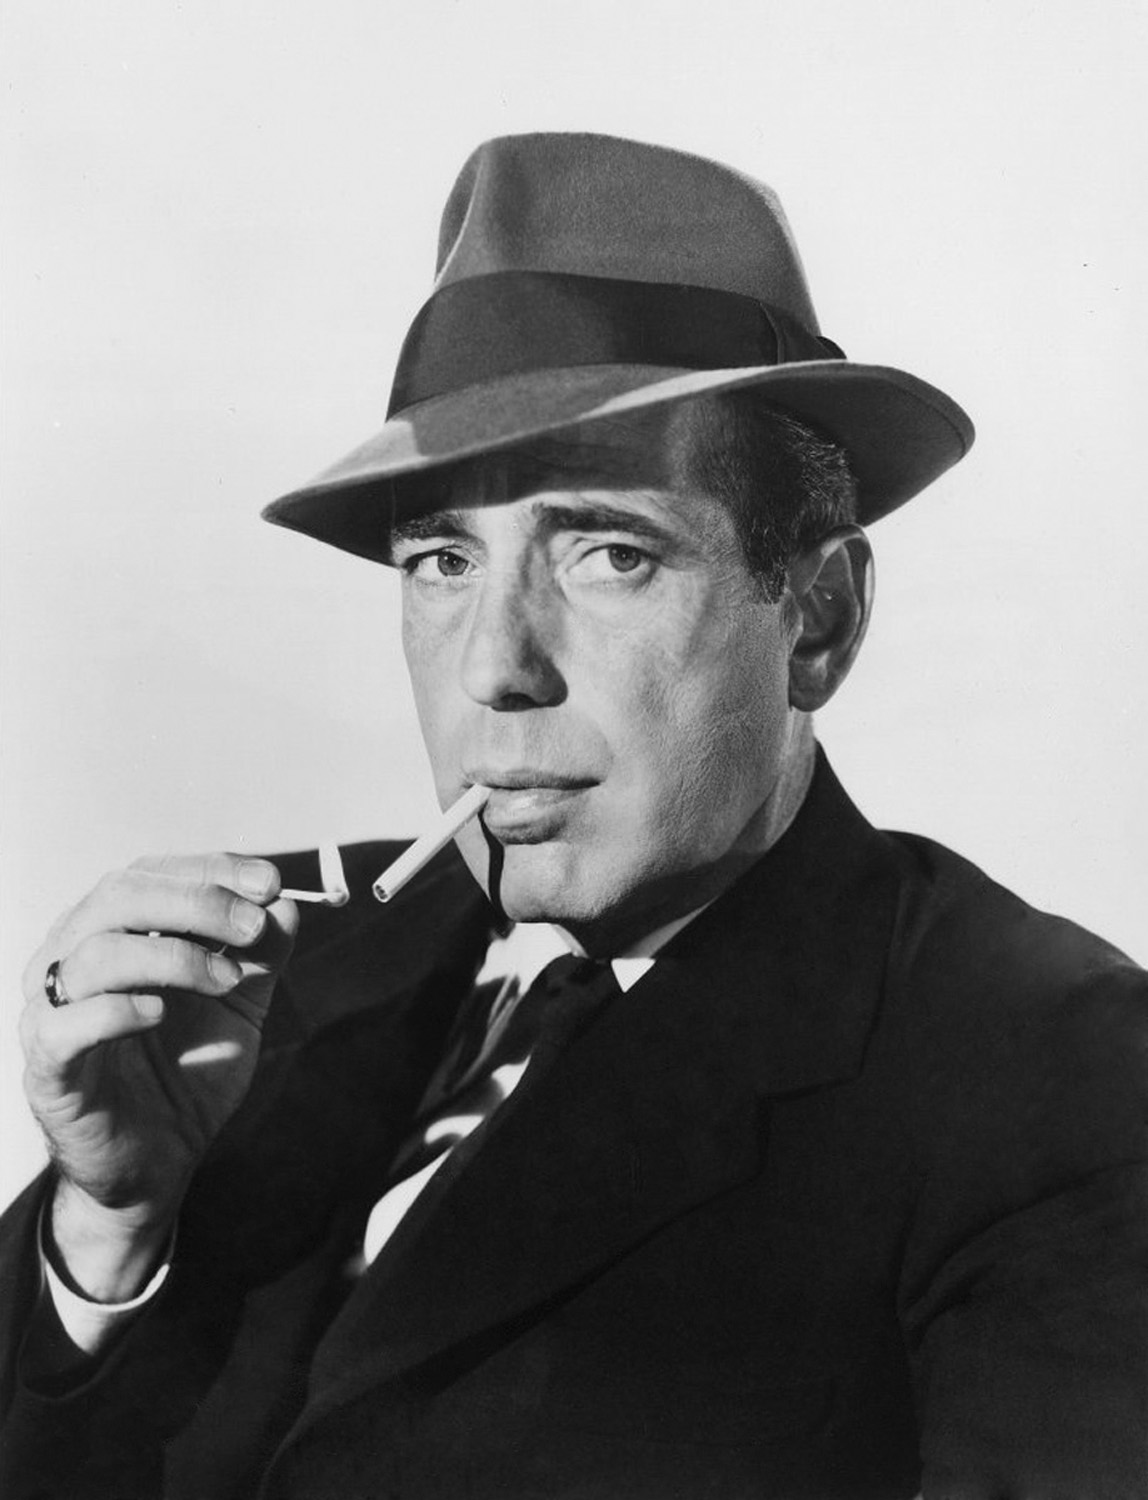 Who is Lucifer? What are they doing? - Page 6 Annex%20-%20Bogart,%20Humphrey%20(Dead%20Reckoning)_01